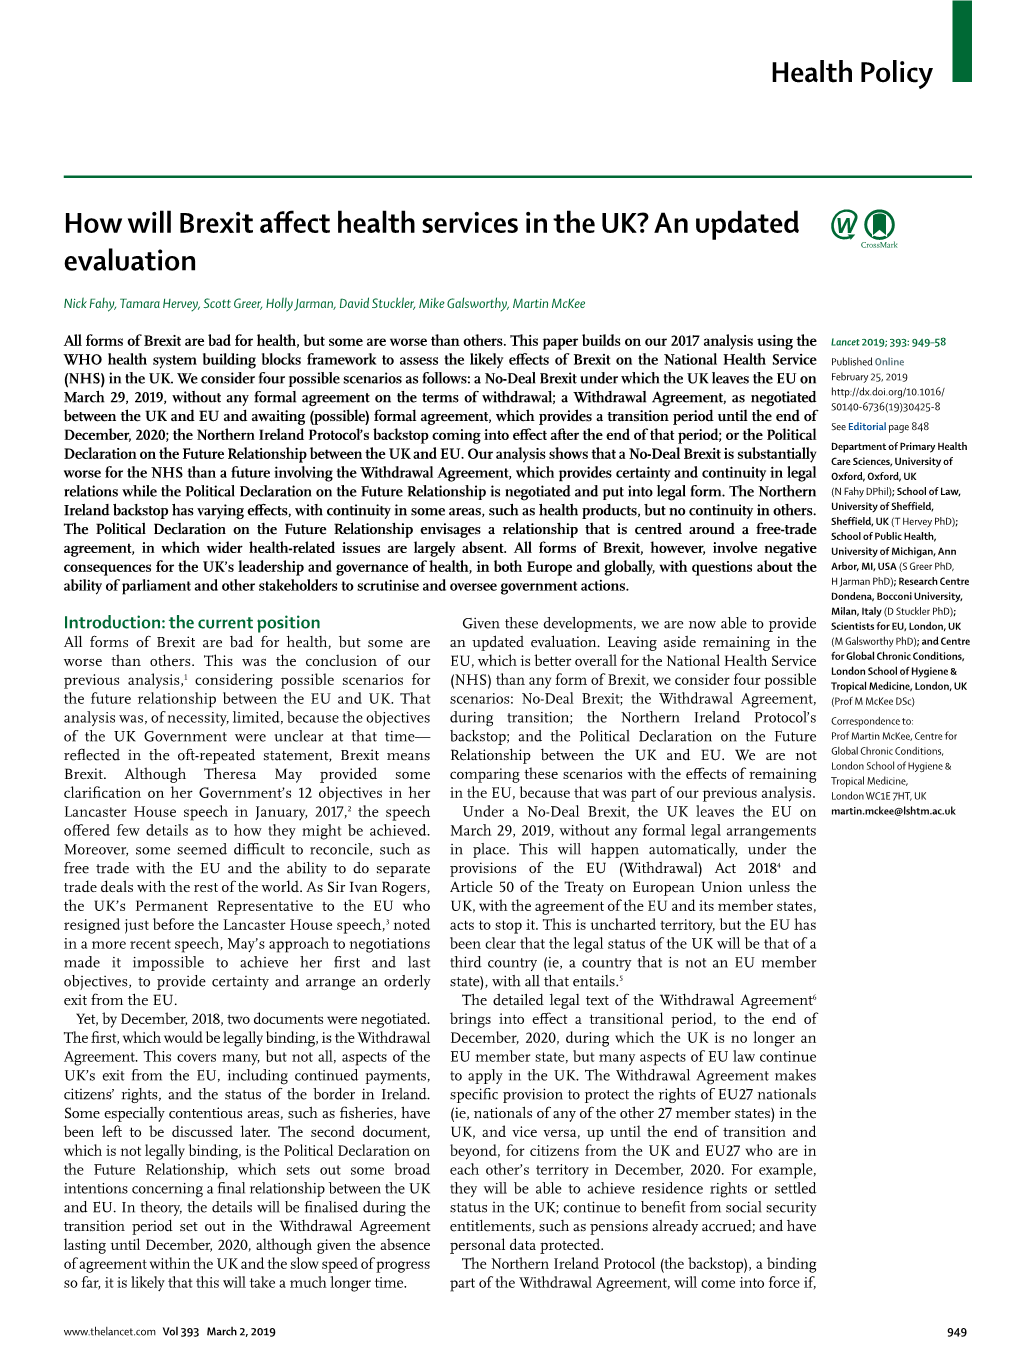 How Will Brexit Affect Health Services in the UK? an Updated Evaluation